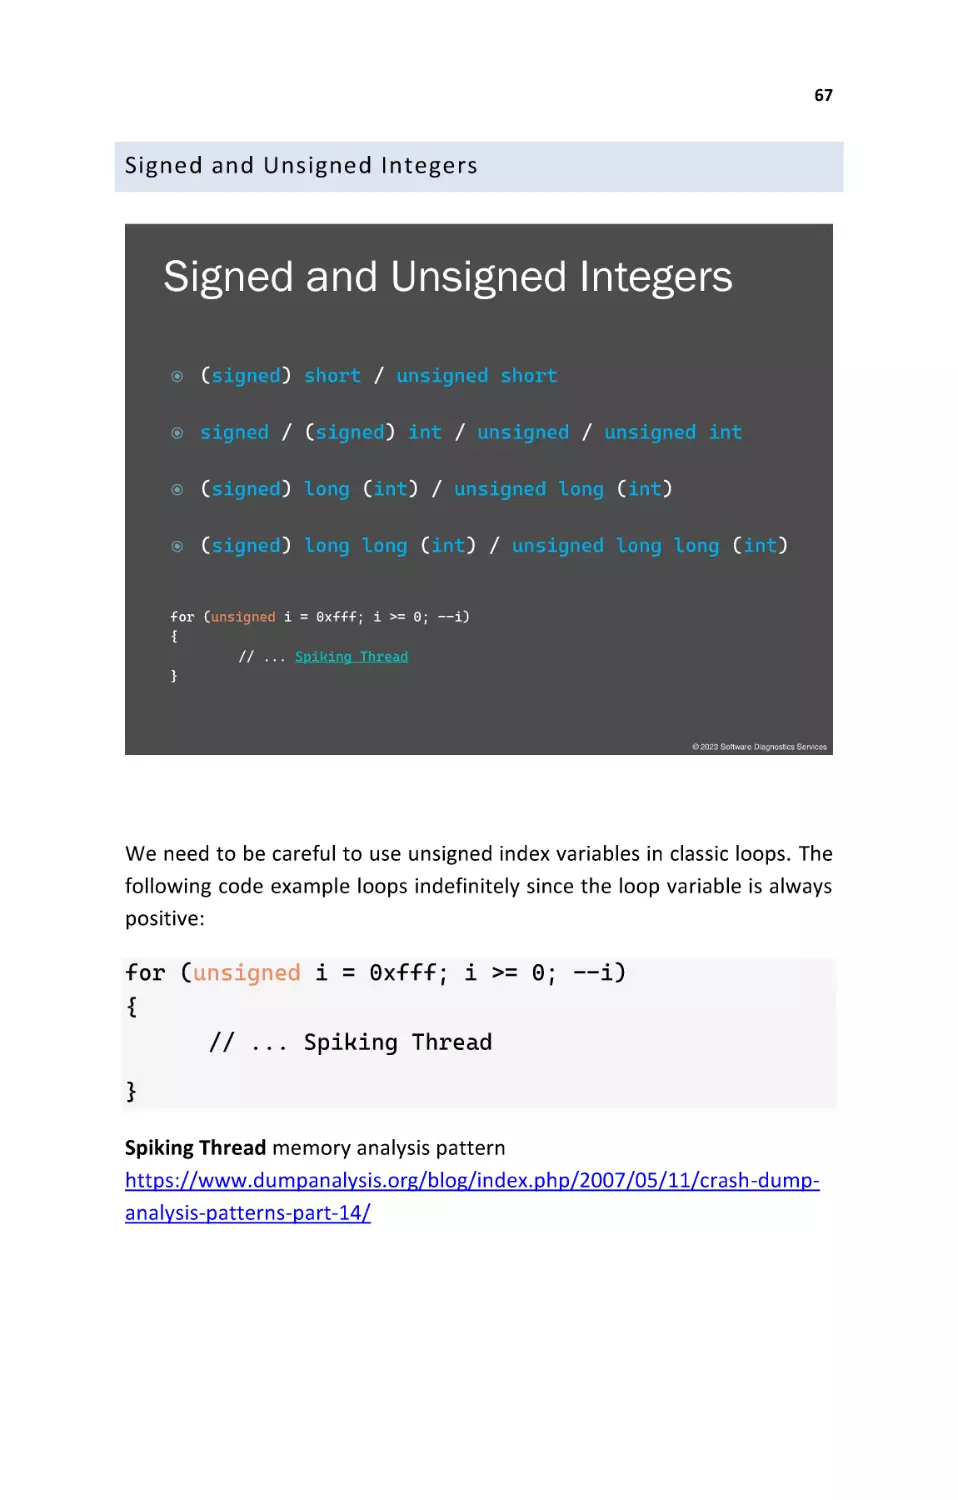 Signed and Unsigned Integers